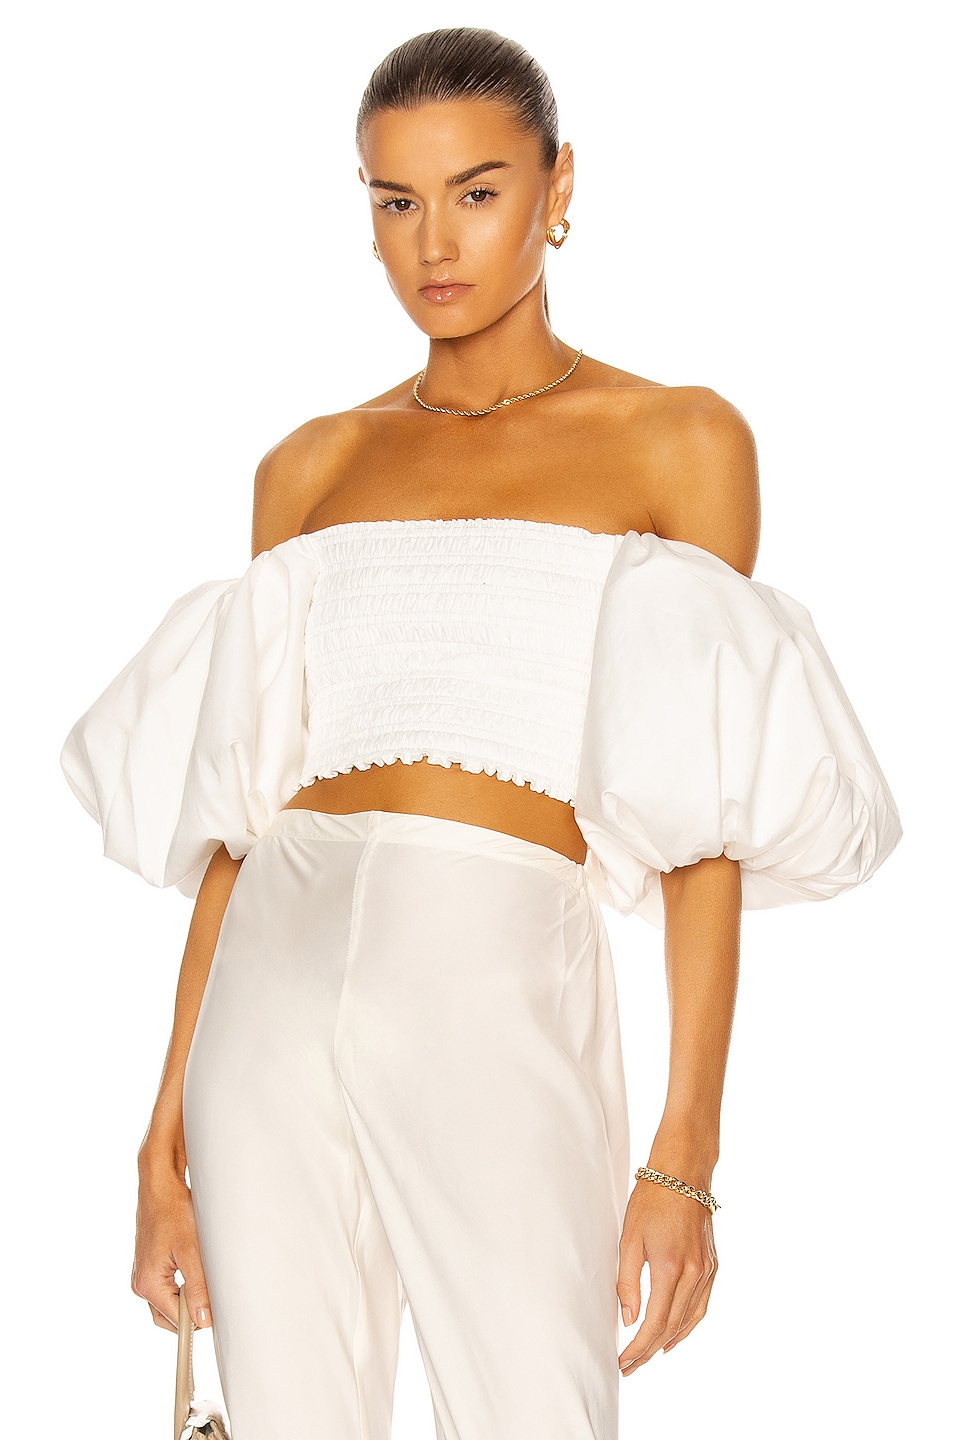 Aje Cascade Cropped Top in Ivory | FWRD